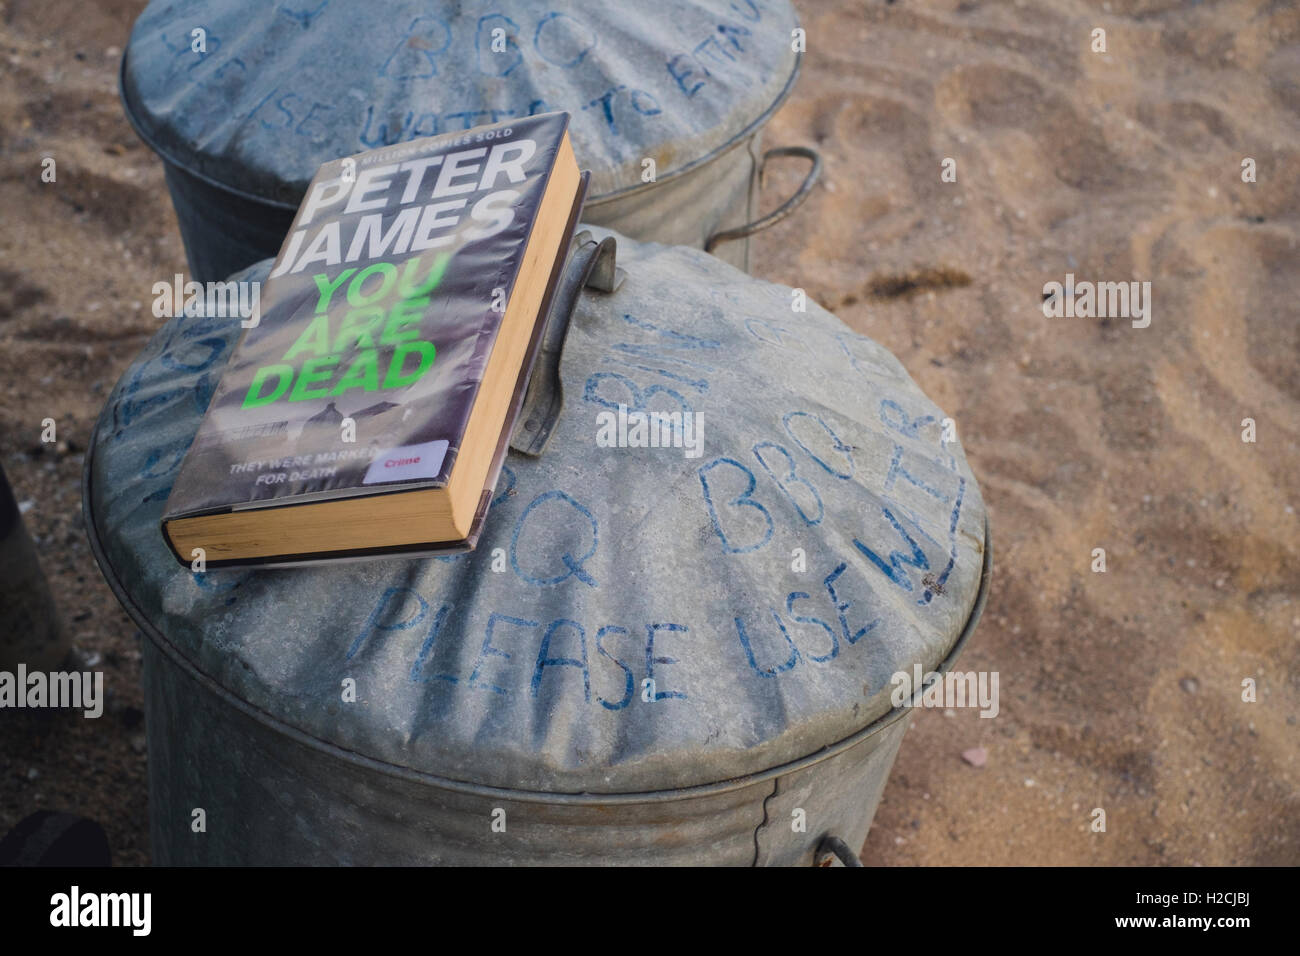 A library book left on top of the bar be que waste bins at Gyllyngvase Beach, Falmouth Stock Photo